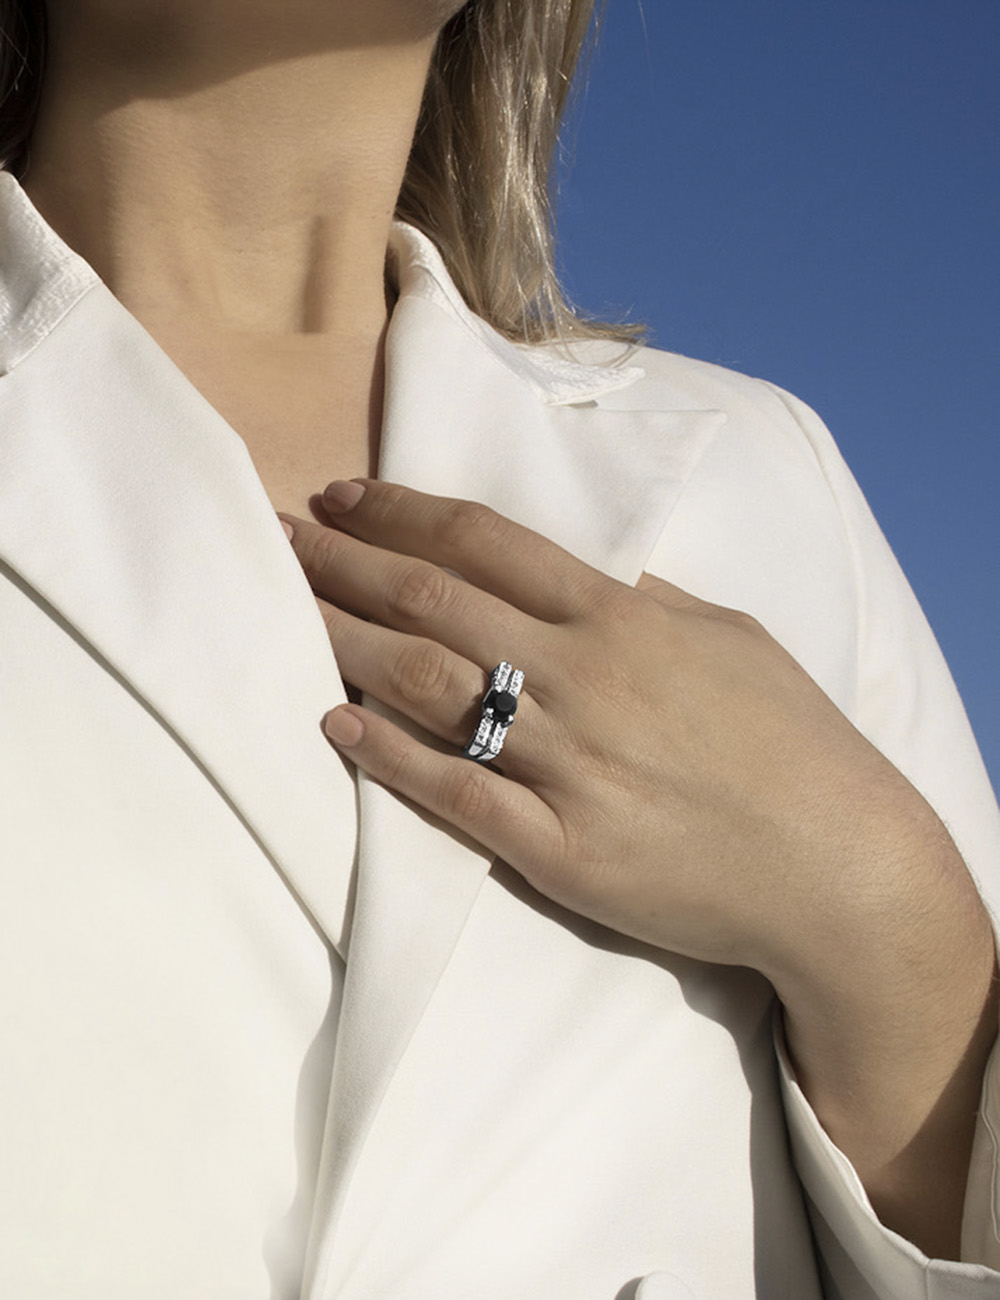 Platinum ring with a black diamond surrounded by white diamonds, echoing New York's architectural boldness.